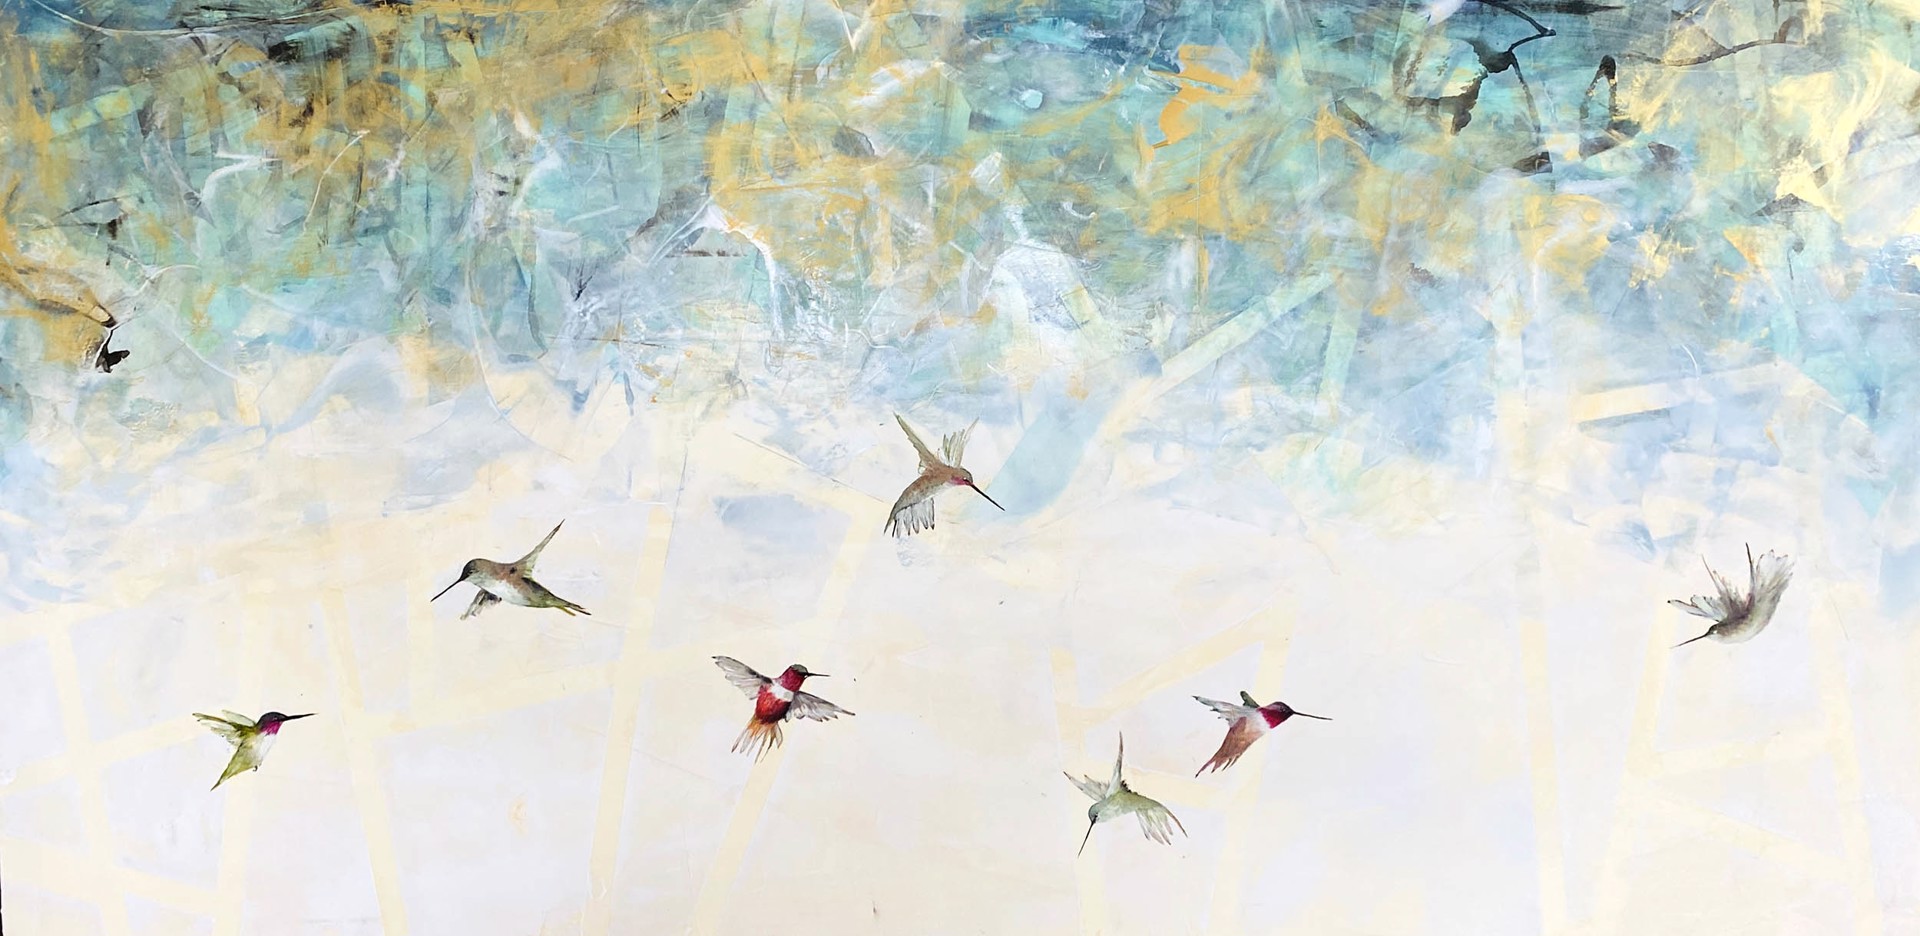 Original Oil Painting Featuring A Flurry Of Flying Hummingbirds Over Abstract Background